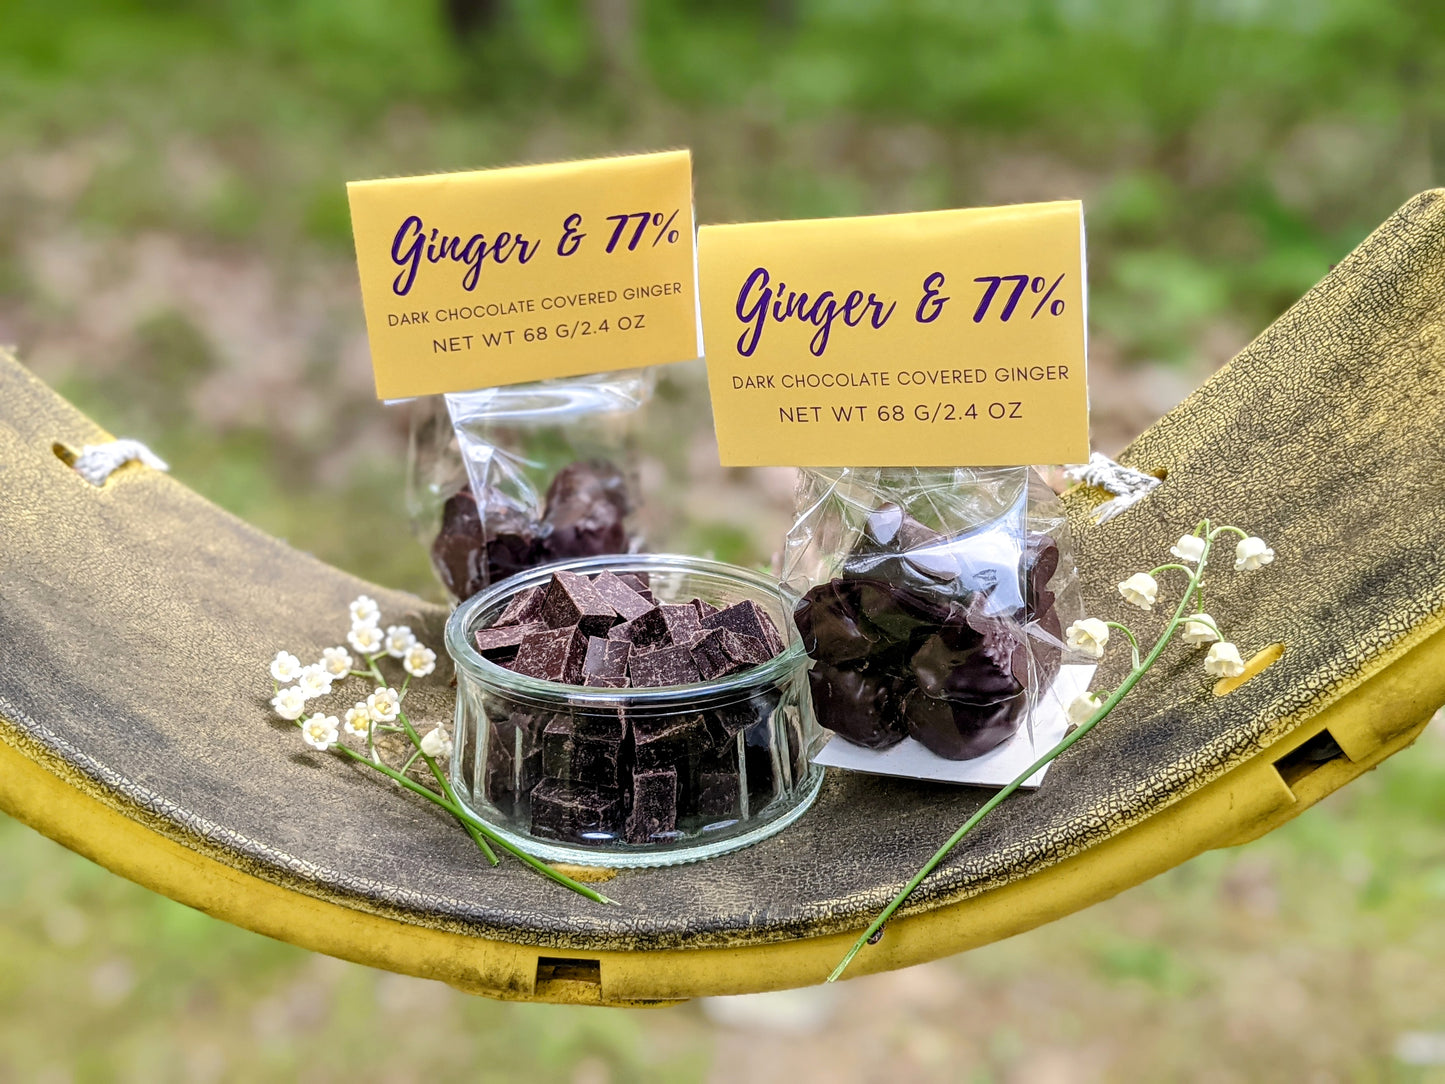 Chocolate Dipped Ginger | 77% Cacao